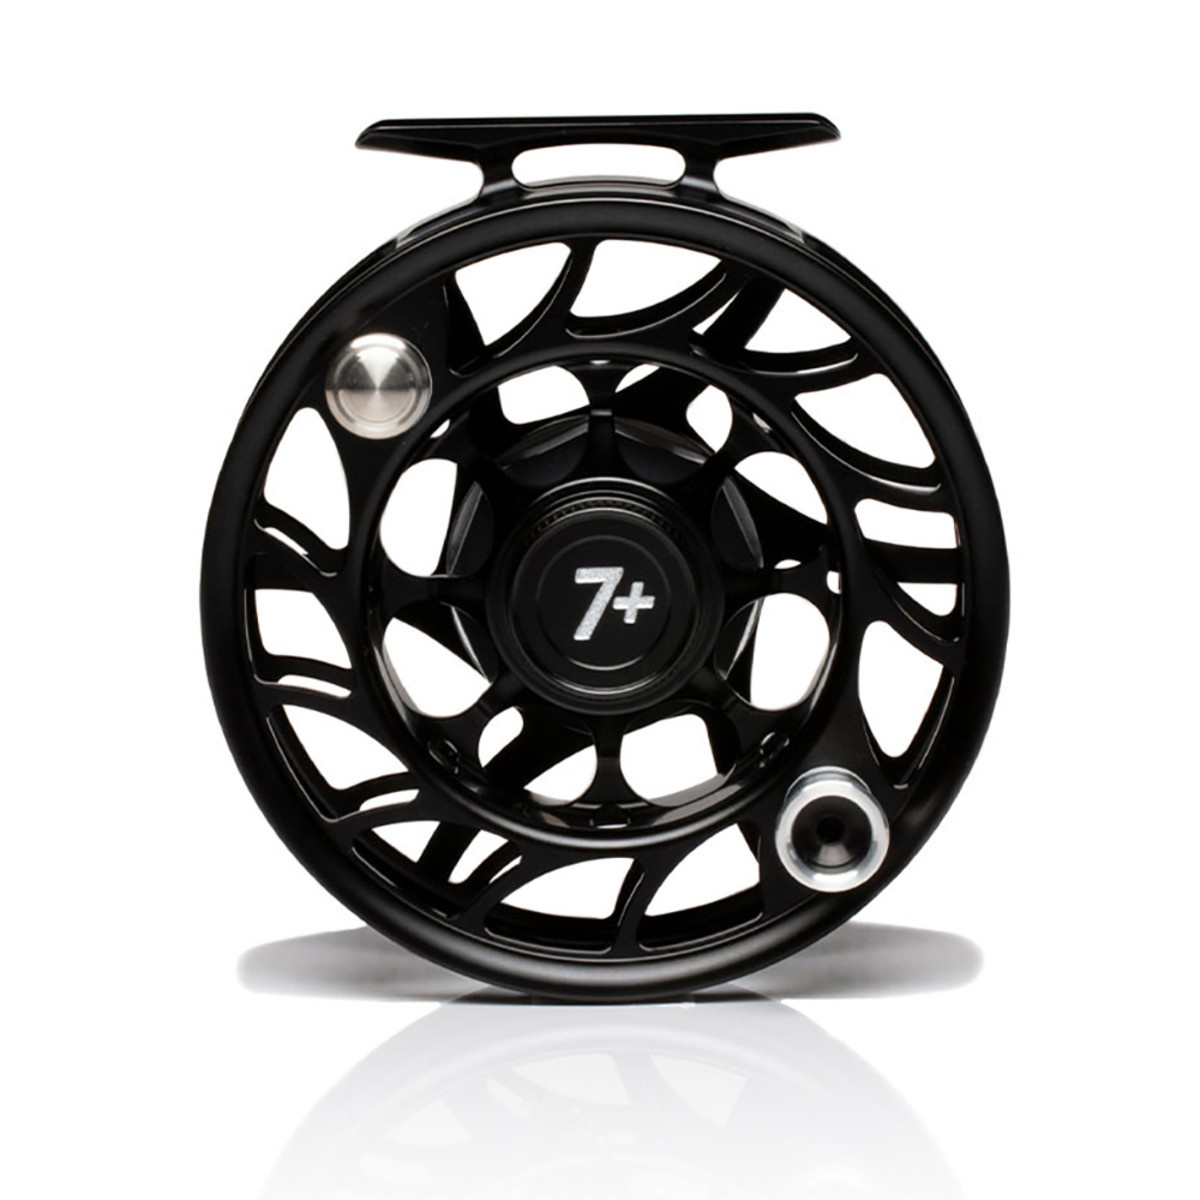 Hatch Iconic Reels - 7 Plus Clear/Red Mid Arbor